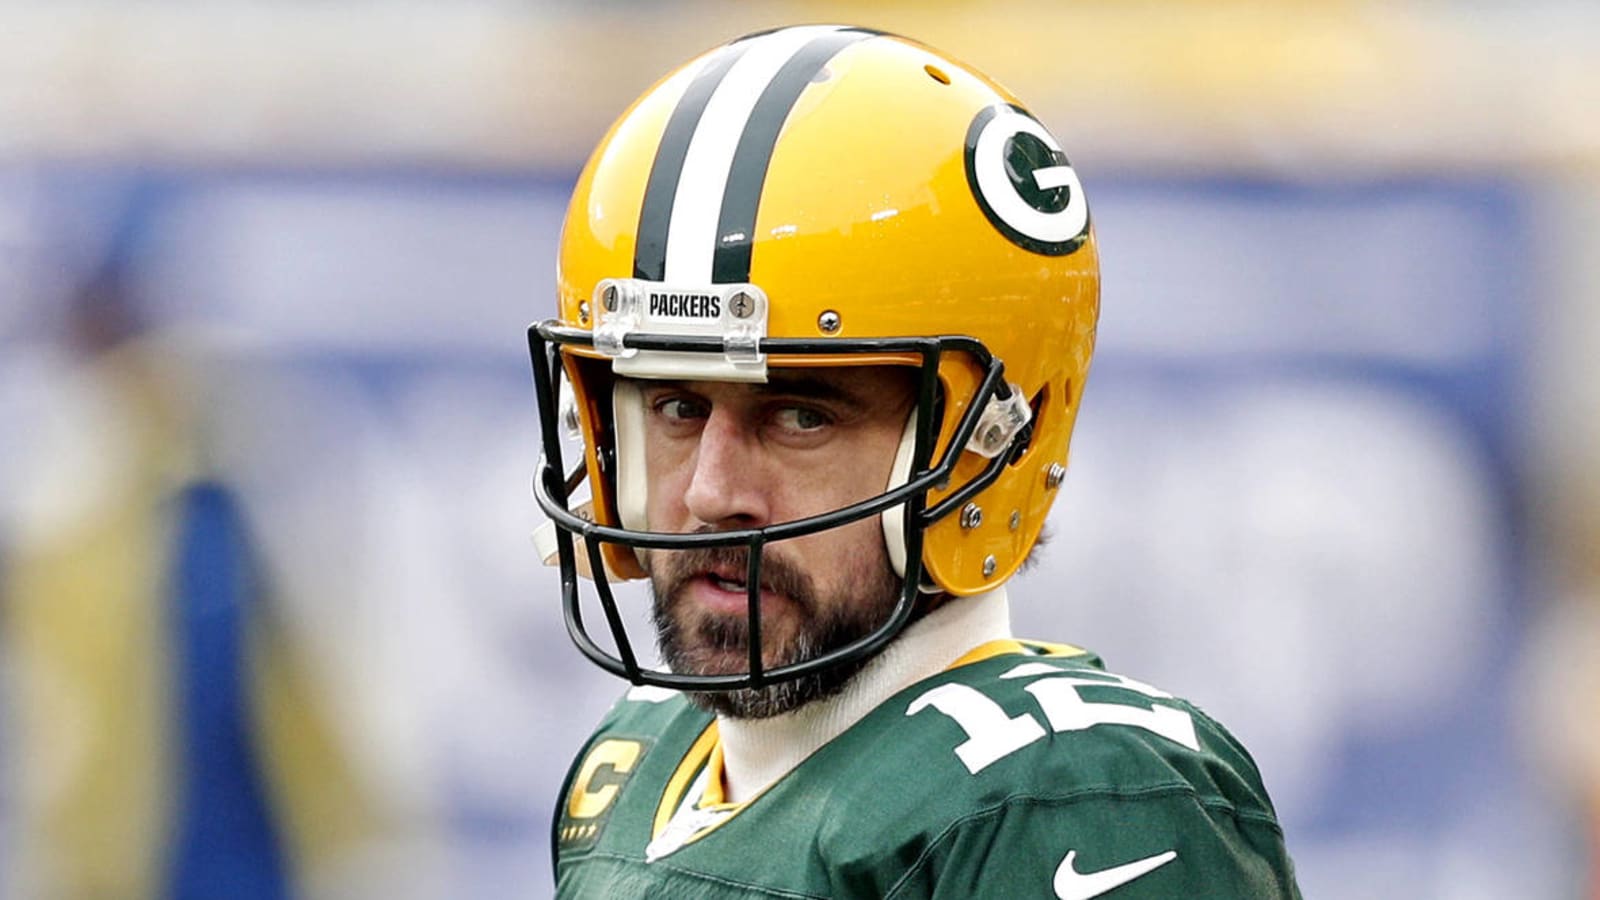 Schefter makes surprising admission about Aaron Rodgers story